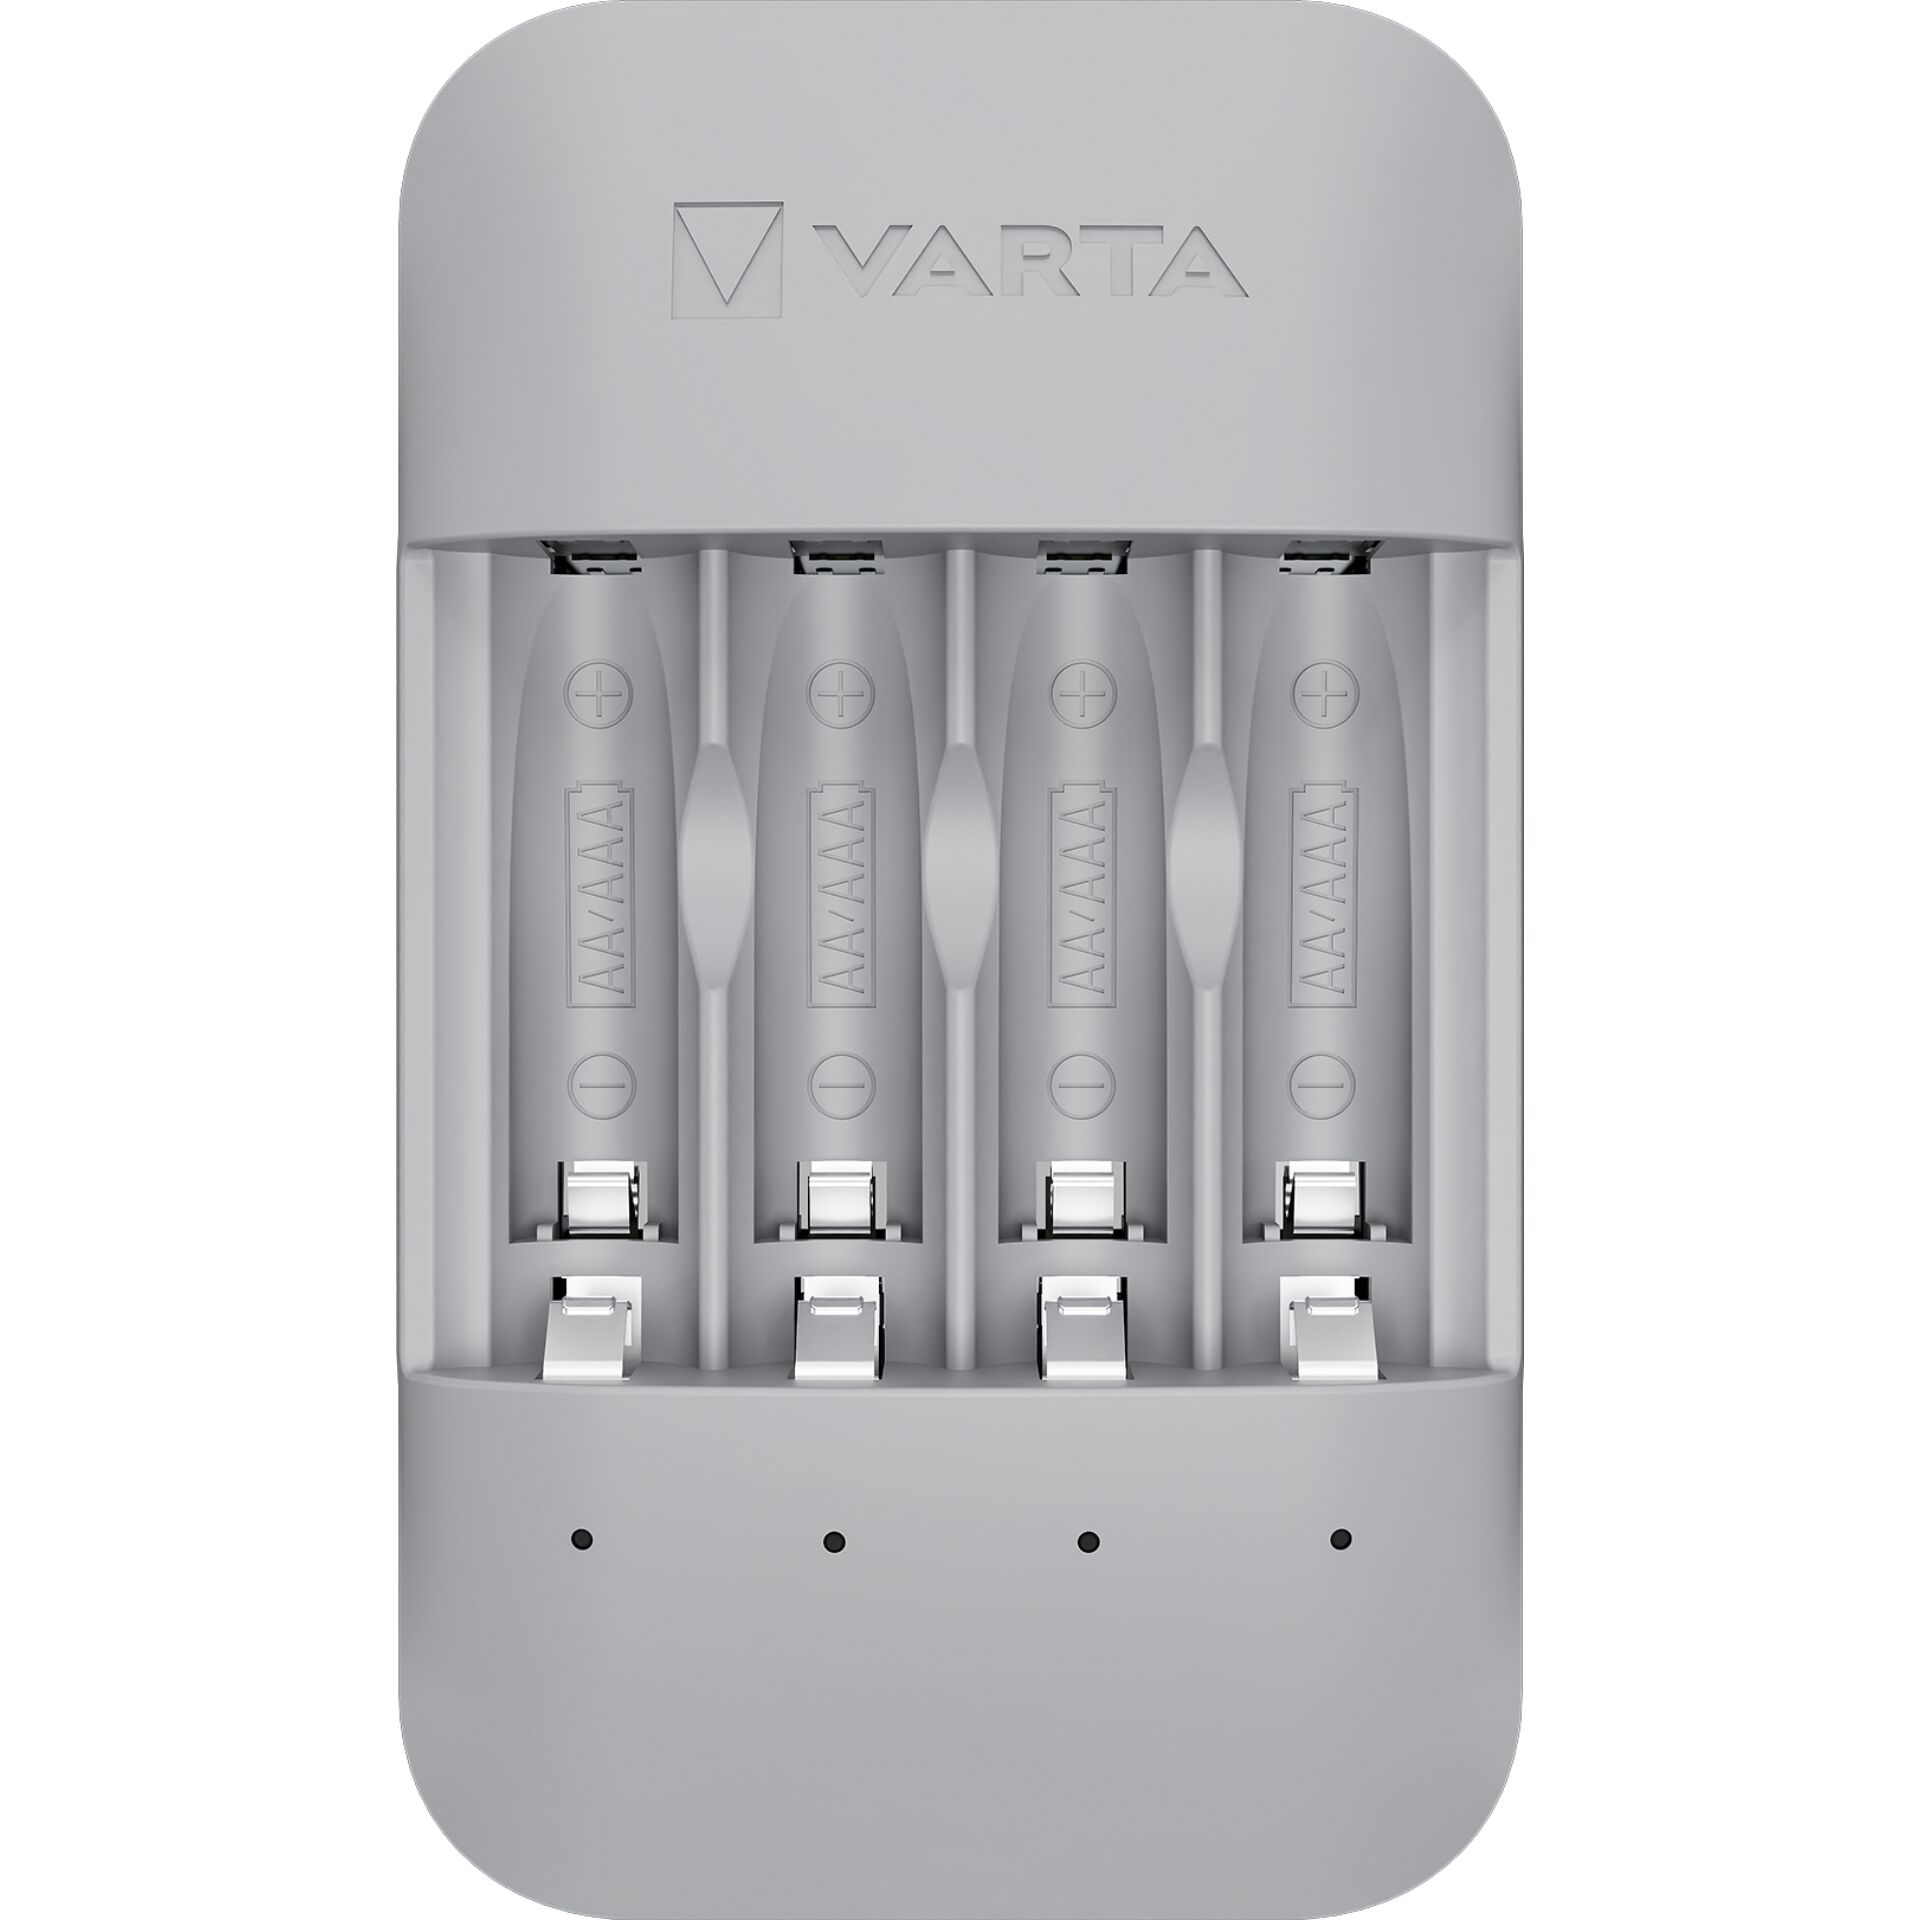 Varta Eco Charger Pro Recycled 57683 101 111